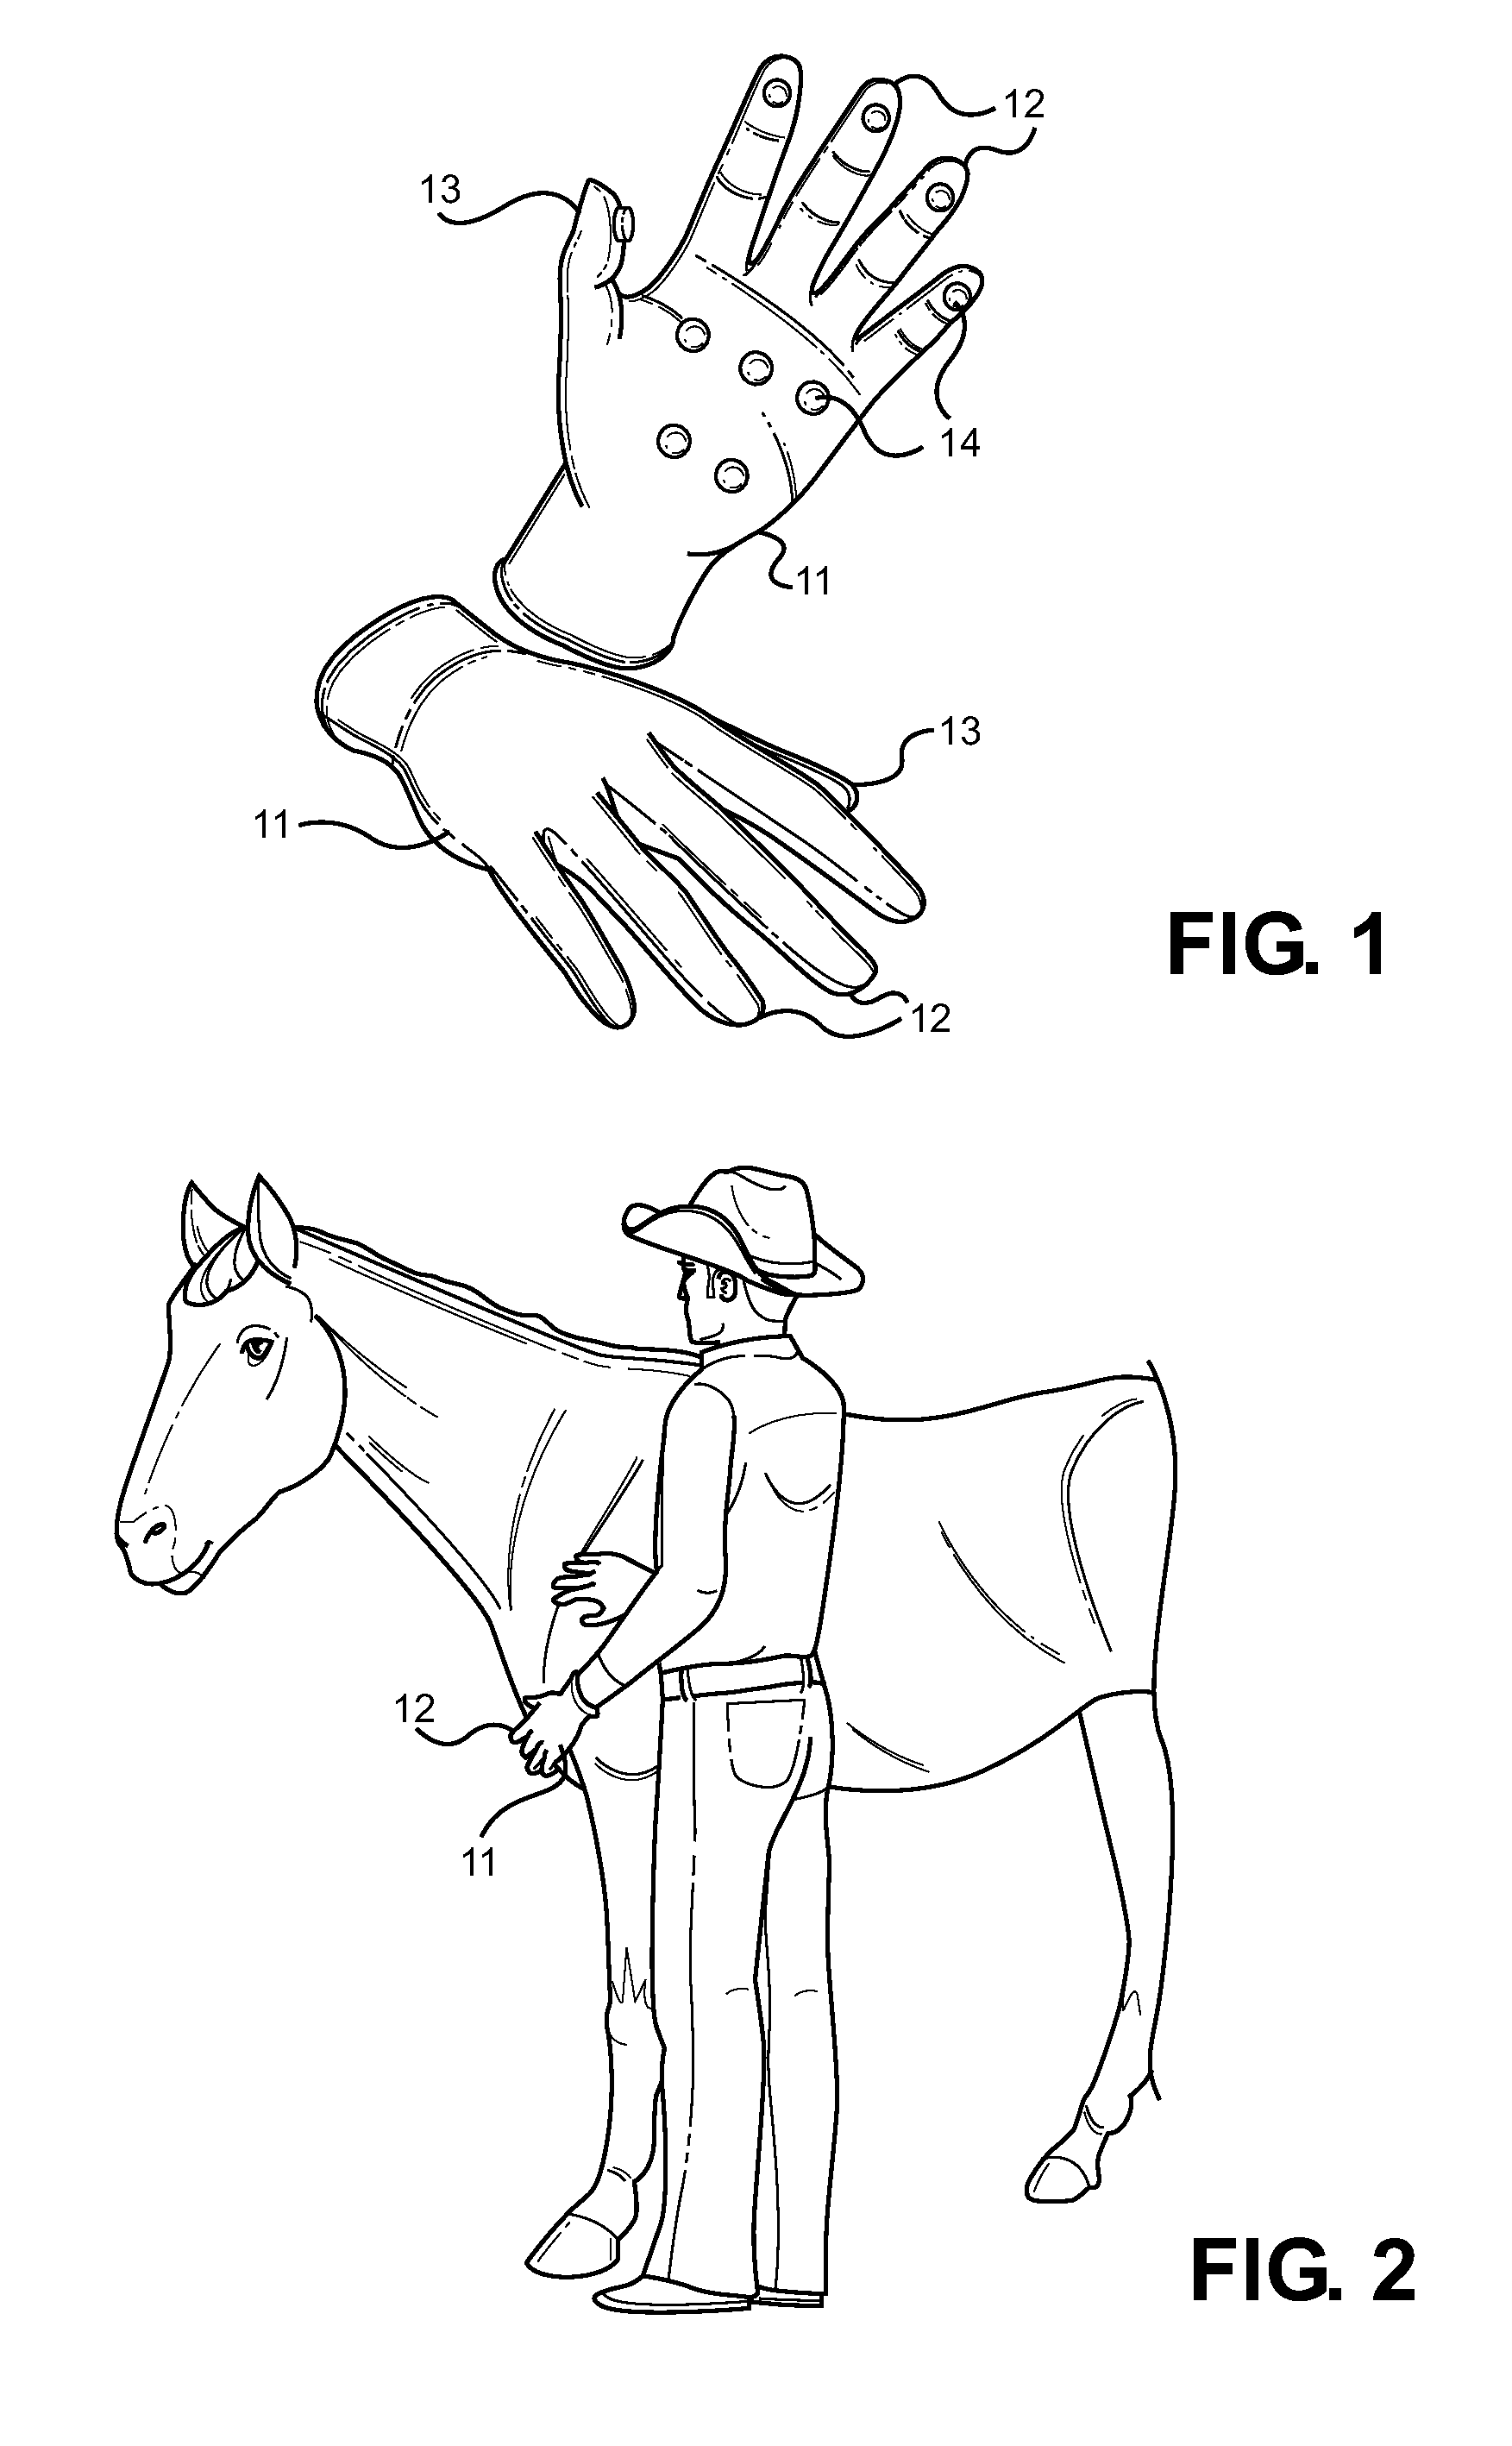 Therapeutic Massage and Utility Gloves for Handling Animals